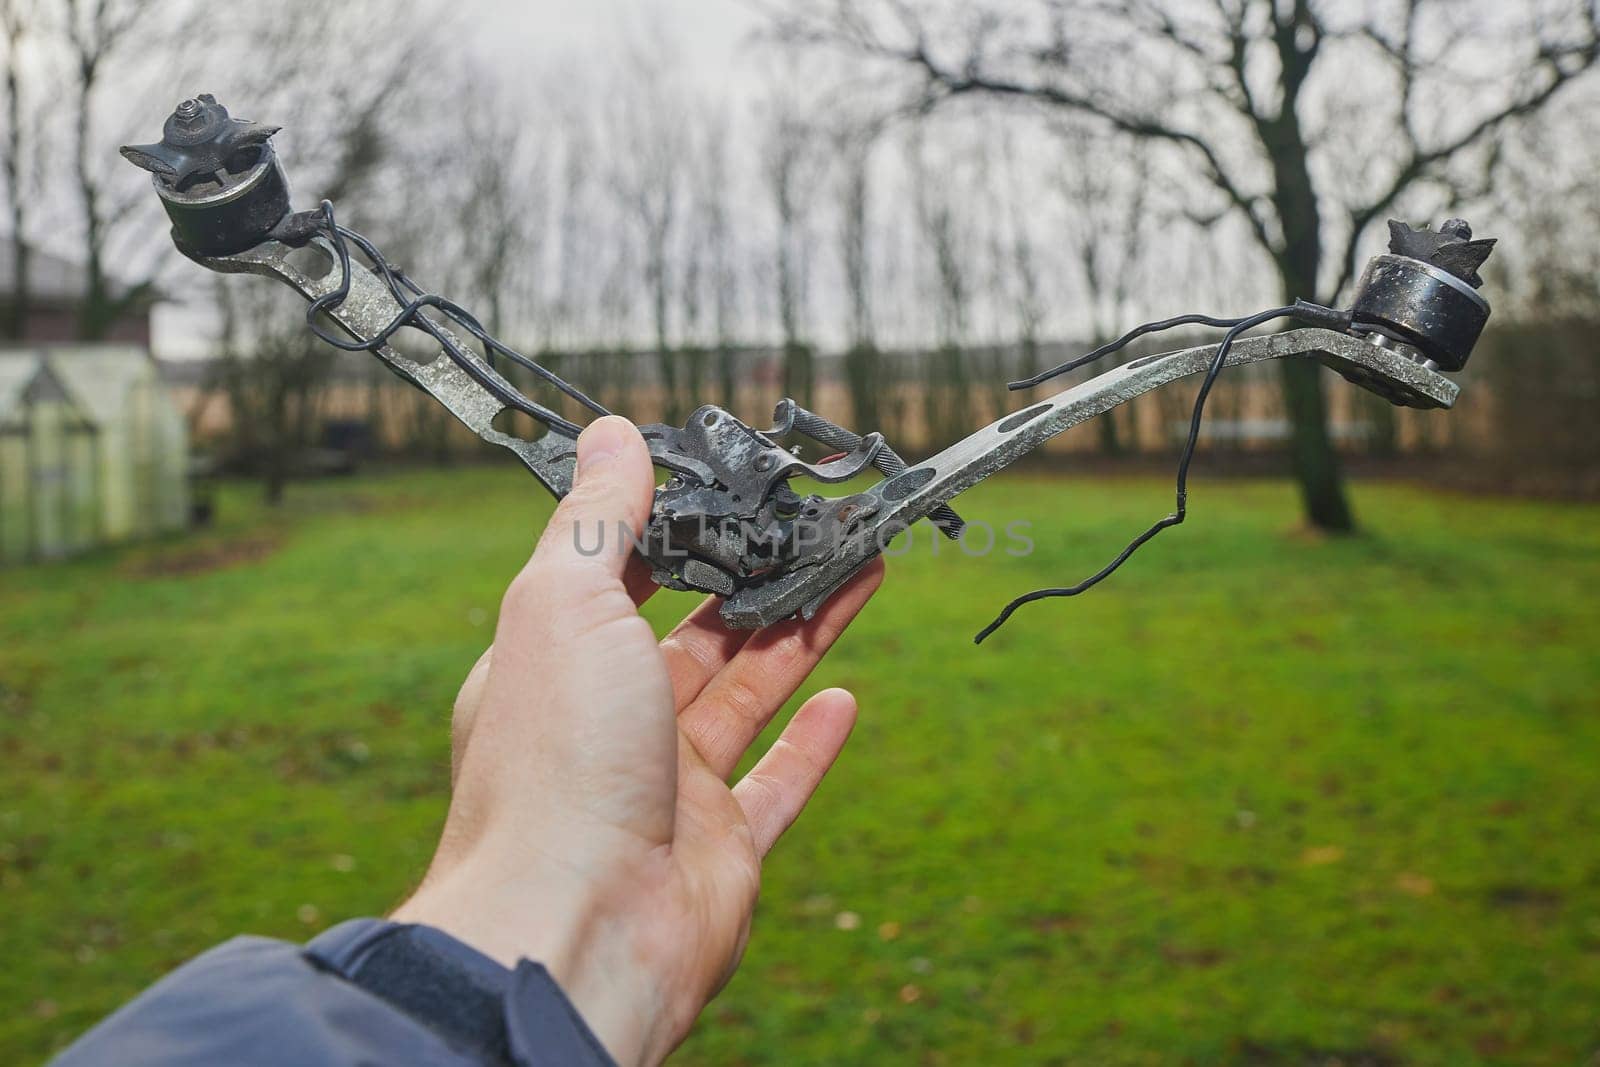 piece of fpv drone that blew up a Russian tank.